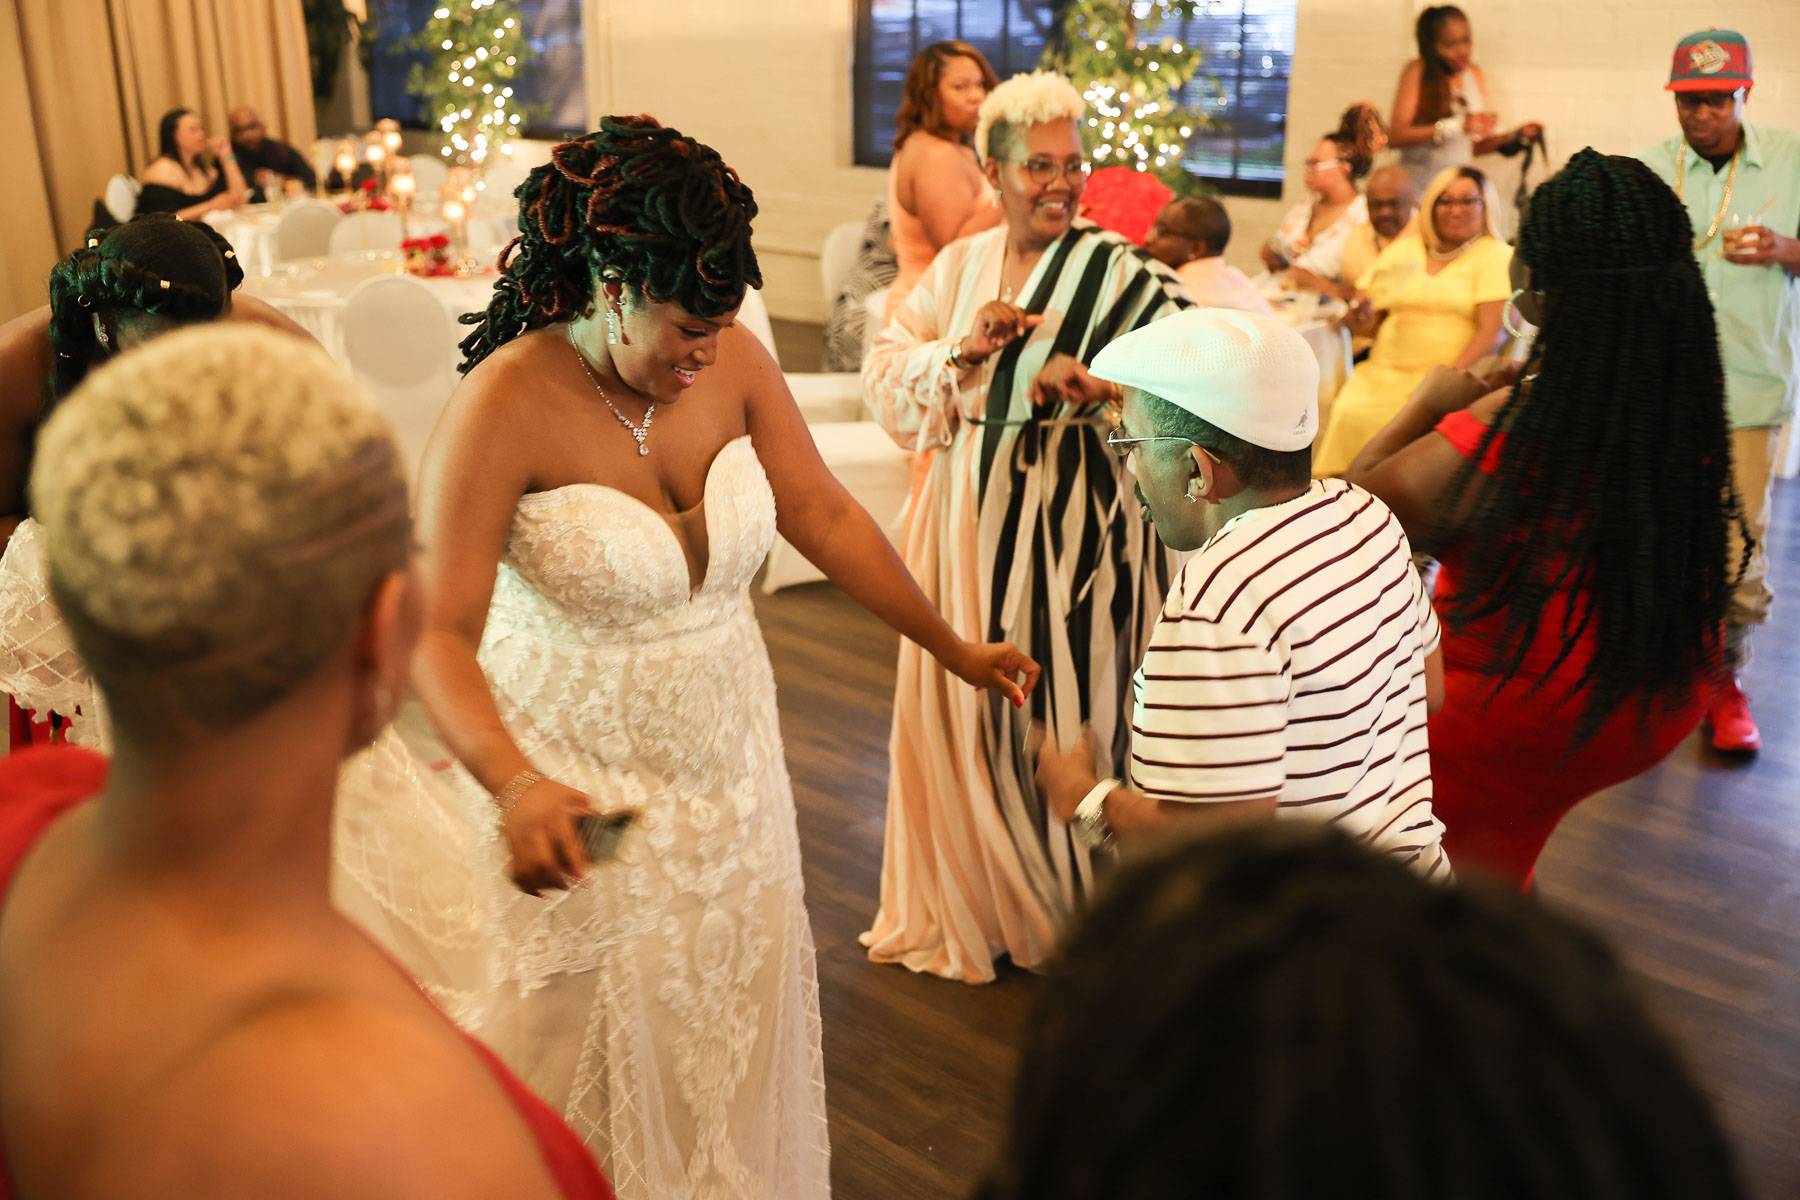 The bride dancing casually in her dress